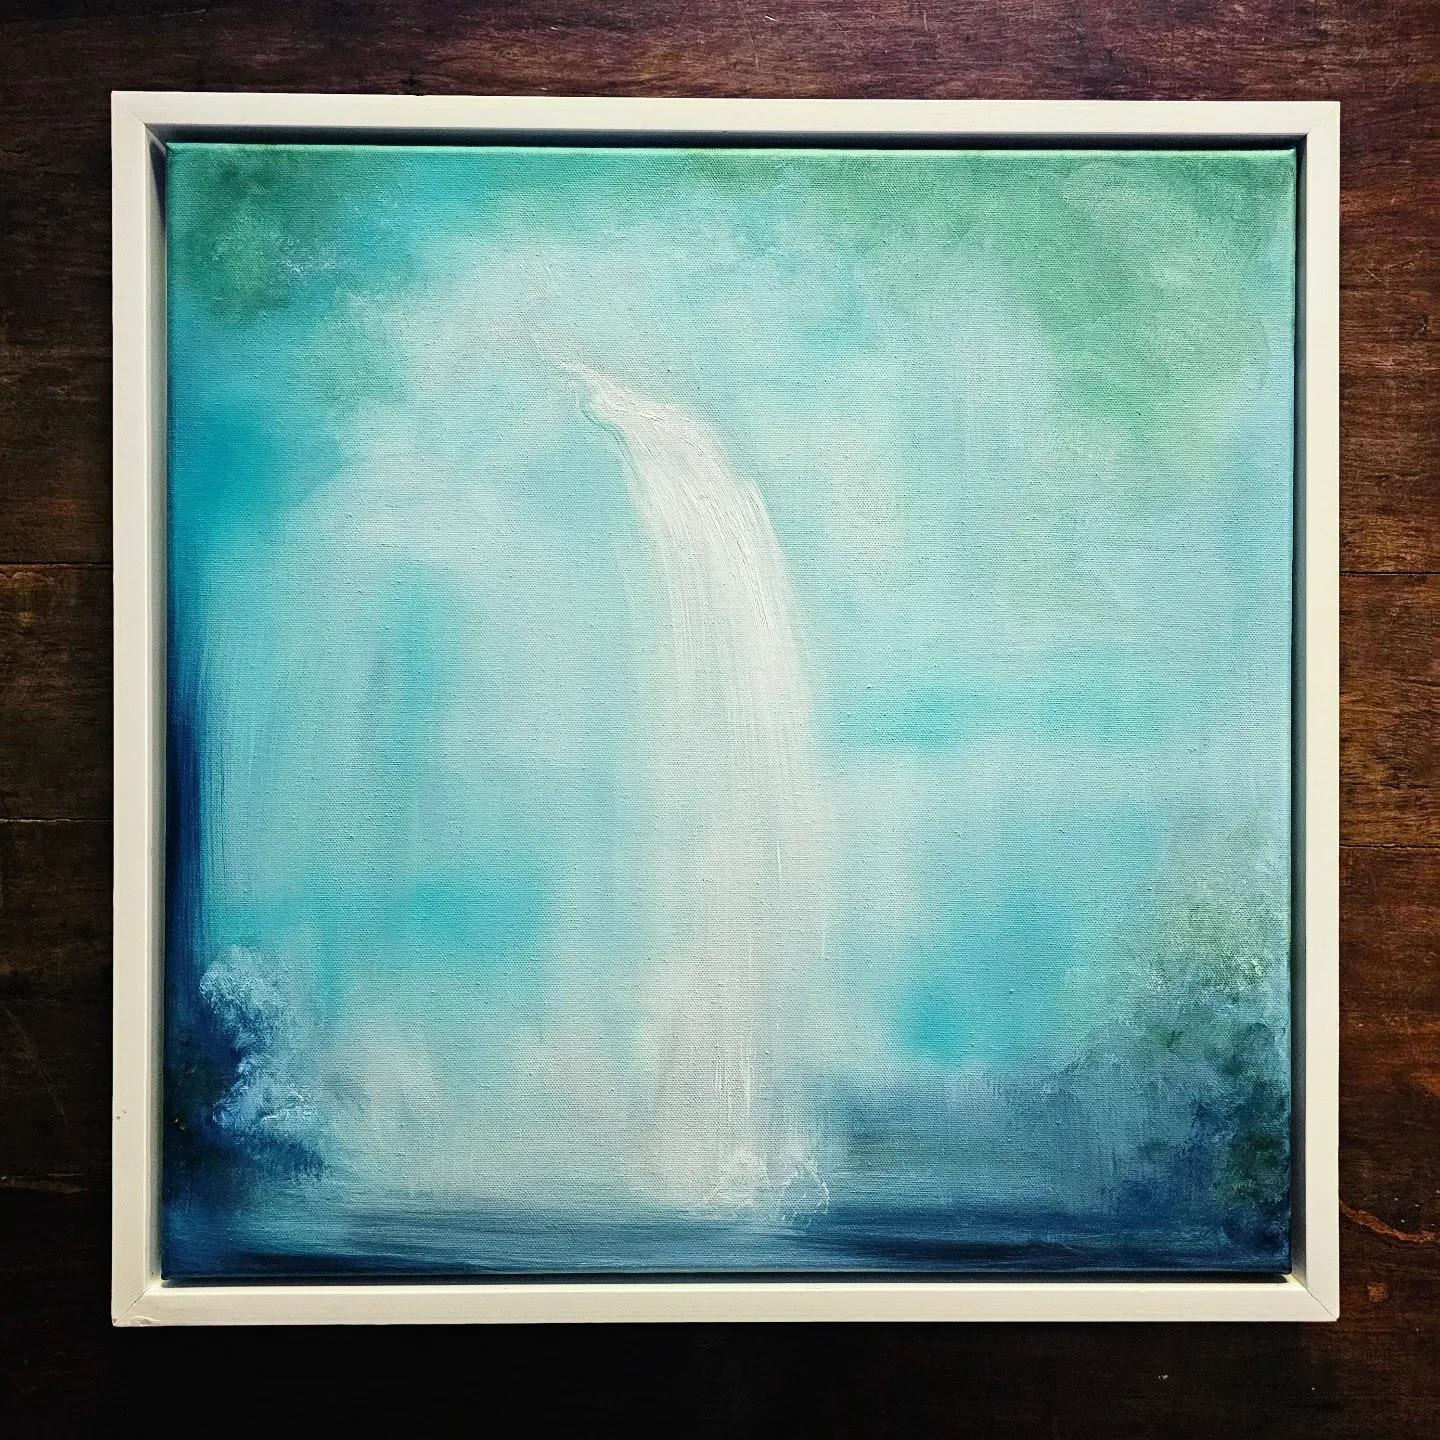 Wellspring is a dancing water interpretation, he new spring and rains creating new life and power in nature. In a beautiful palette of greens, blues, and yellows. A perfect size mounted in an elegant simple white floater frame.